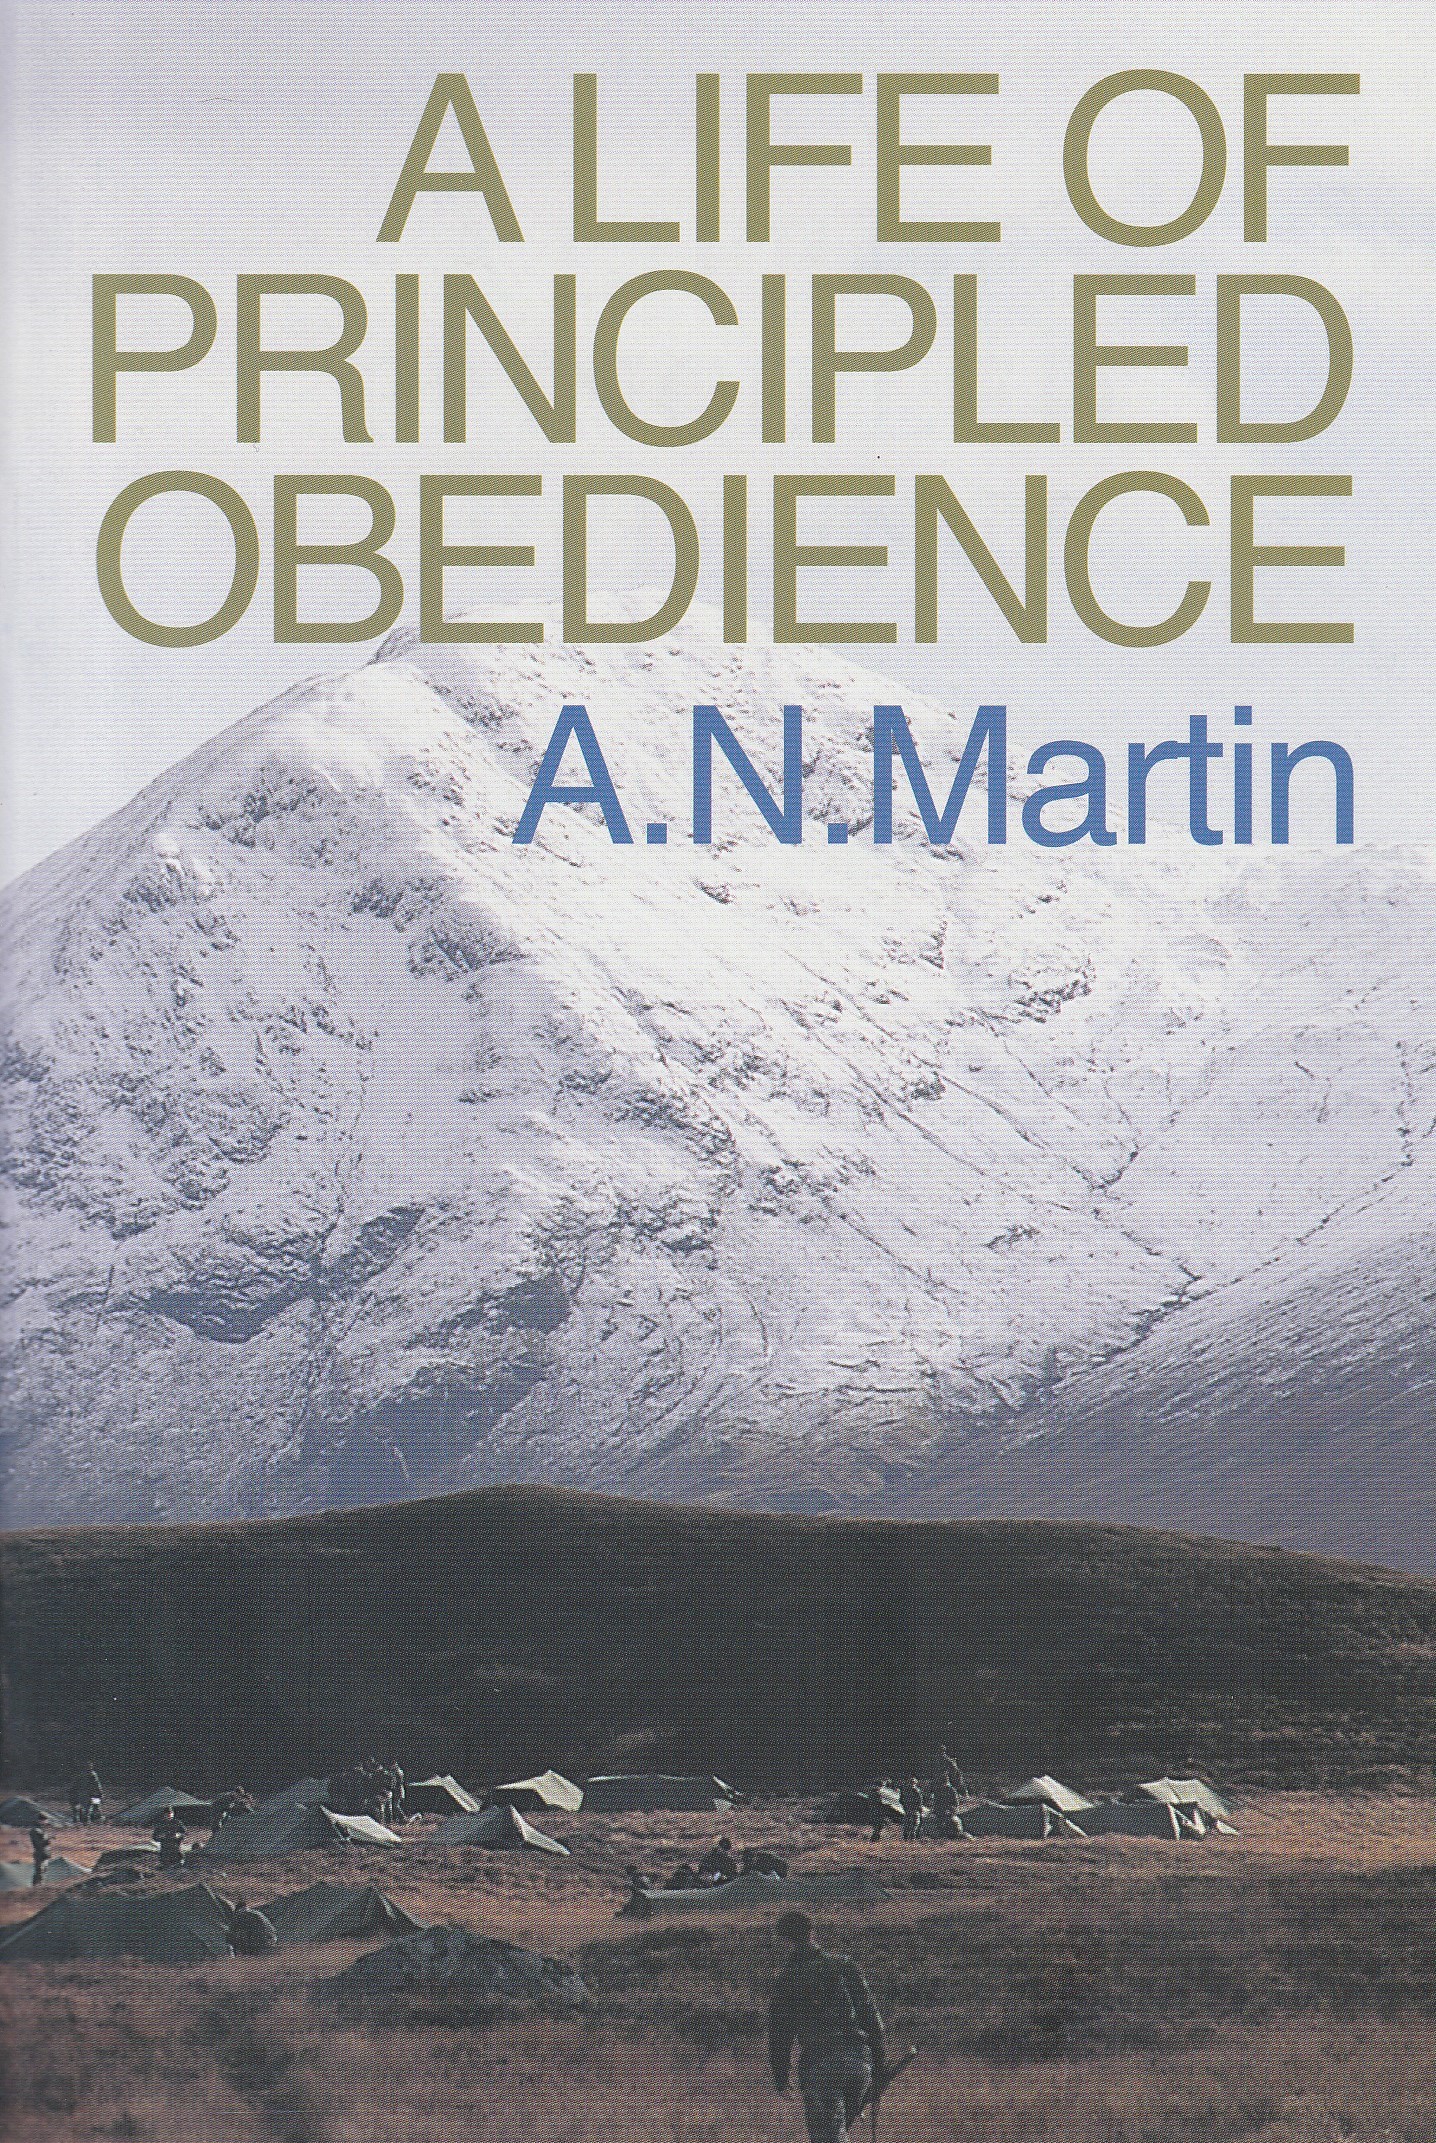 A Life of Principled Obedience